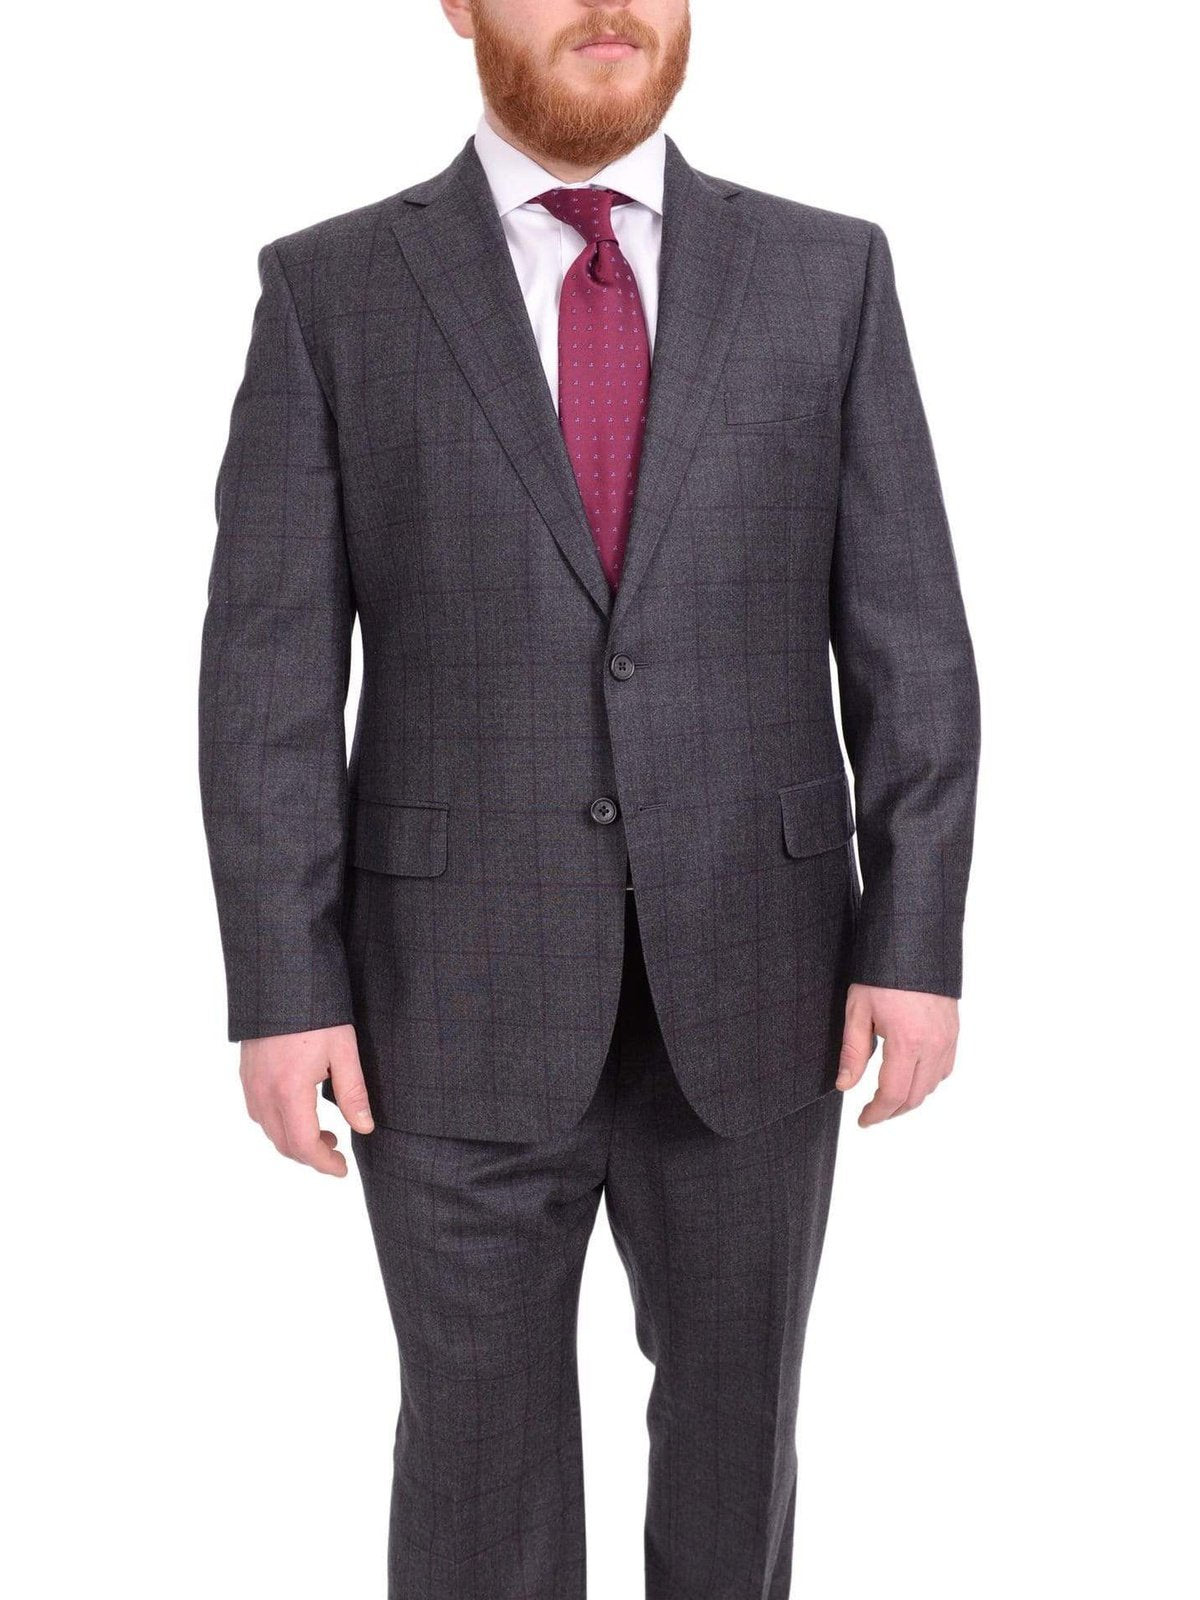 Blujacket TWO PIECE SUITS Blujacket Classic Fit Charcoal Gray Windowpane Half Canvassed Reda Wool Suit